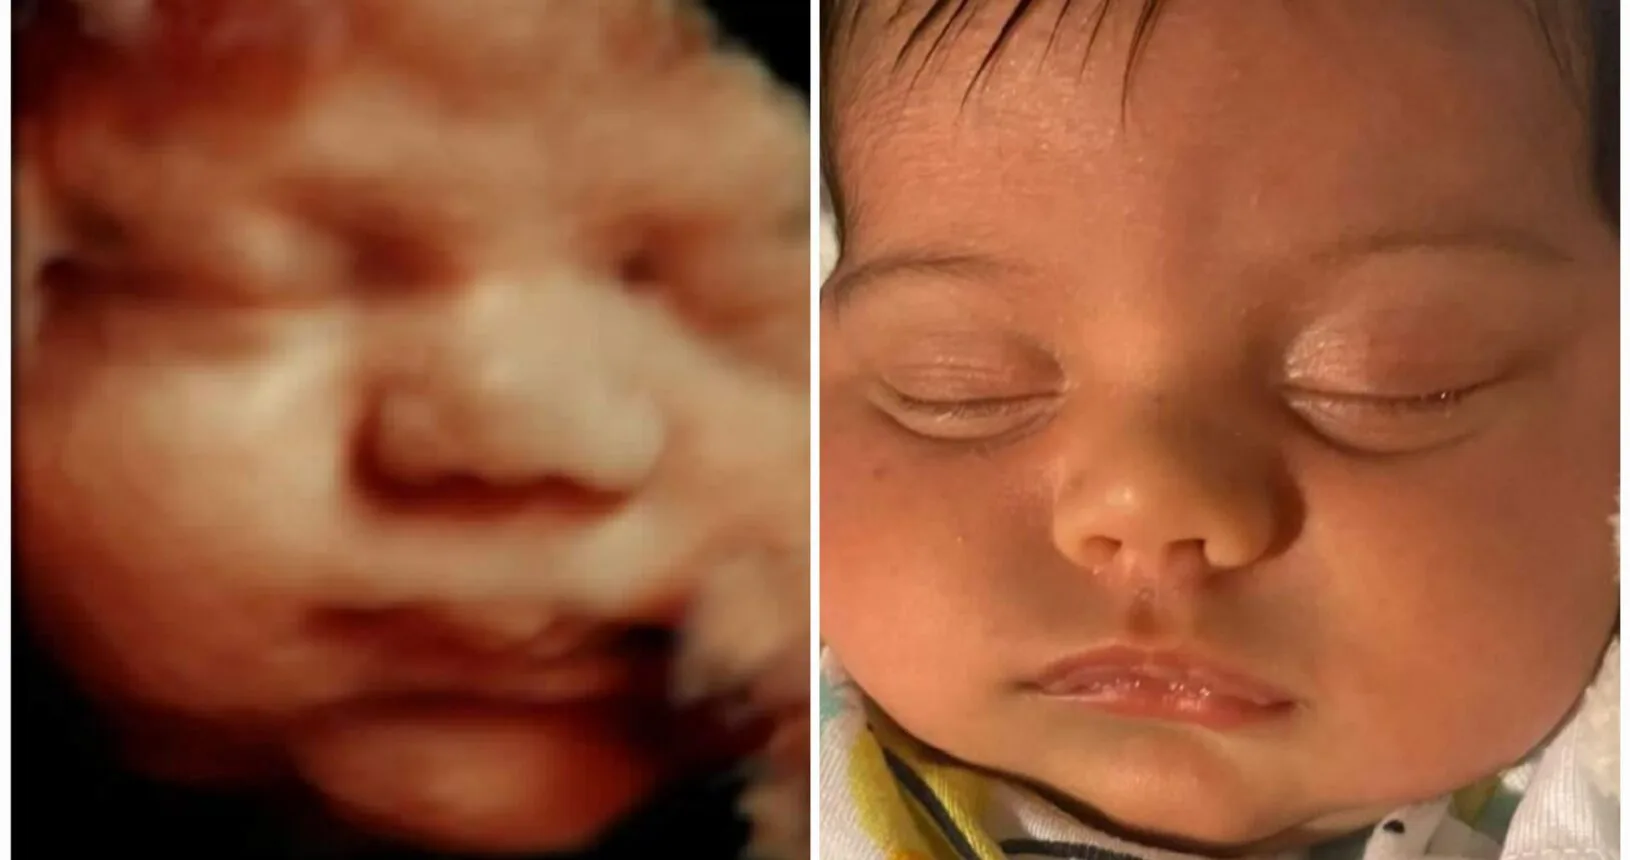 5d 3d ultrasound compared to baby photo